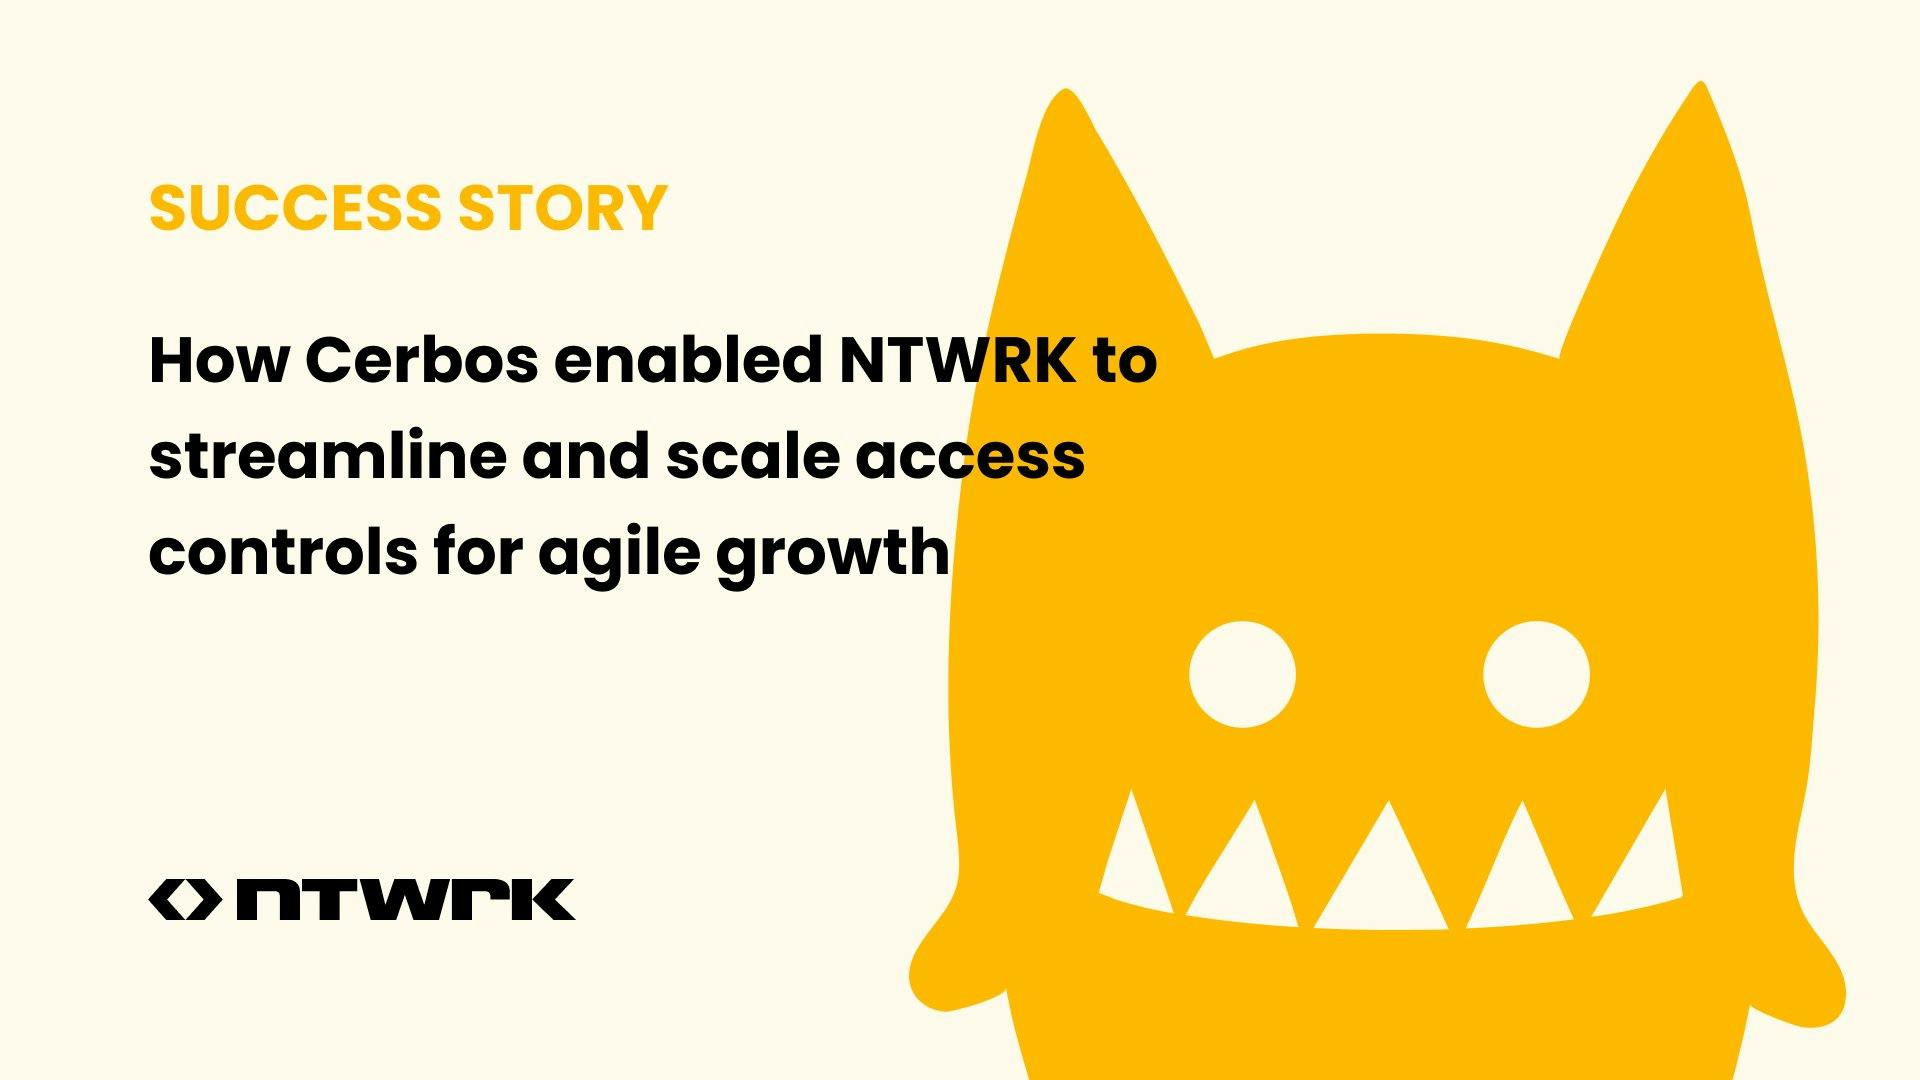 How Cerbos enabled NTWRK to streamline and scale access controls for agile growth